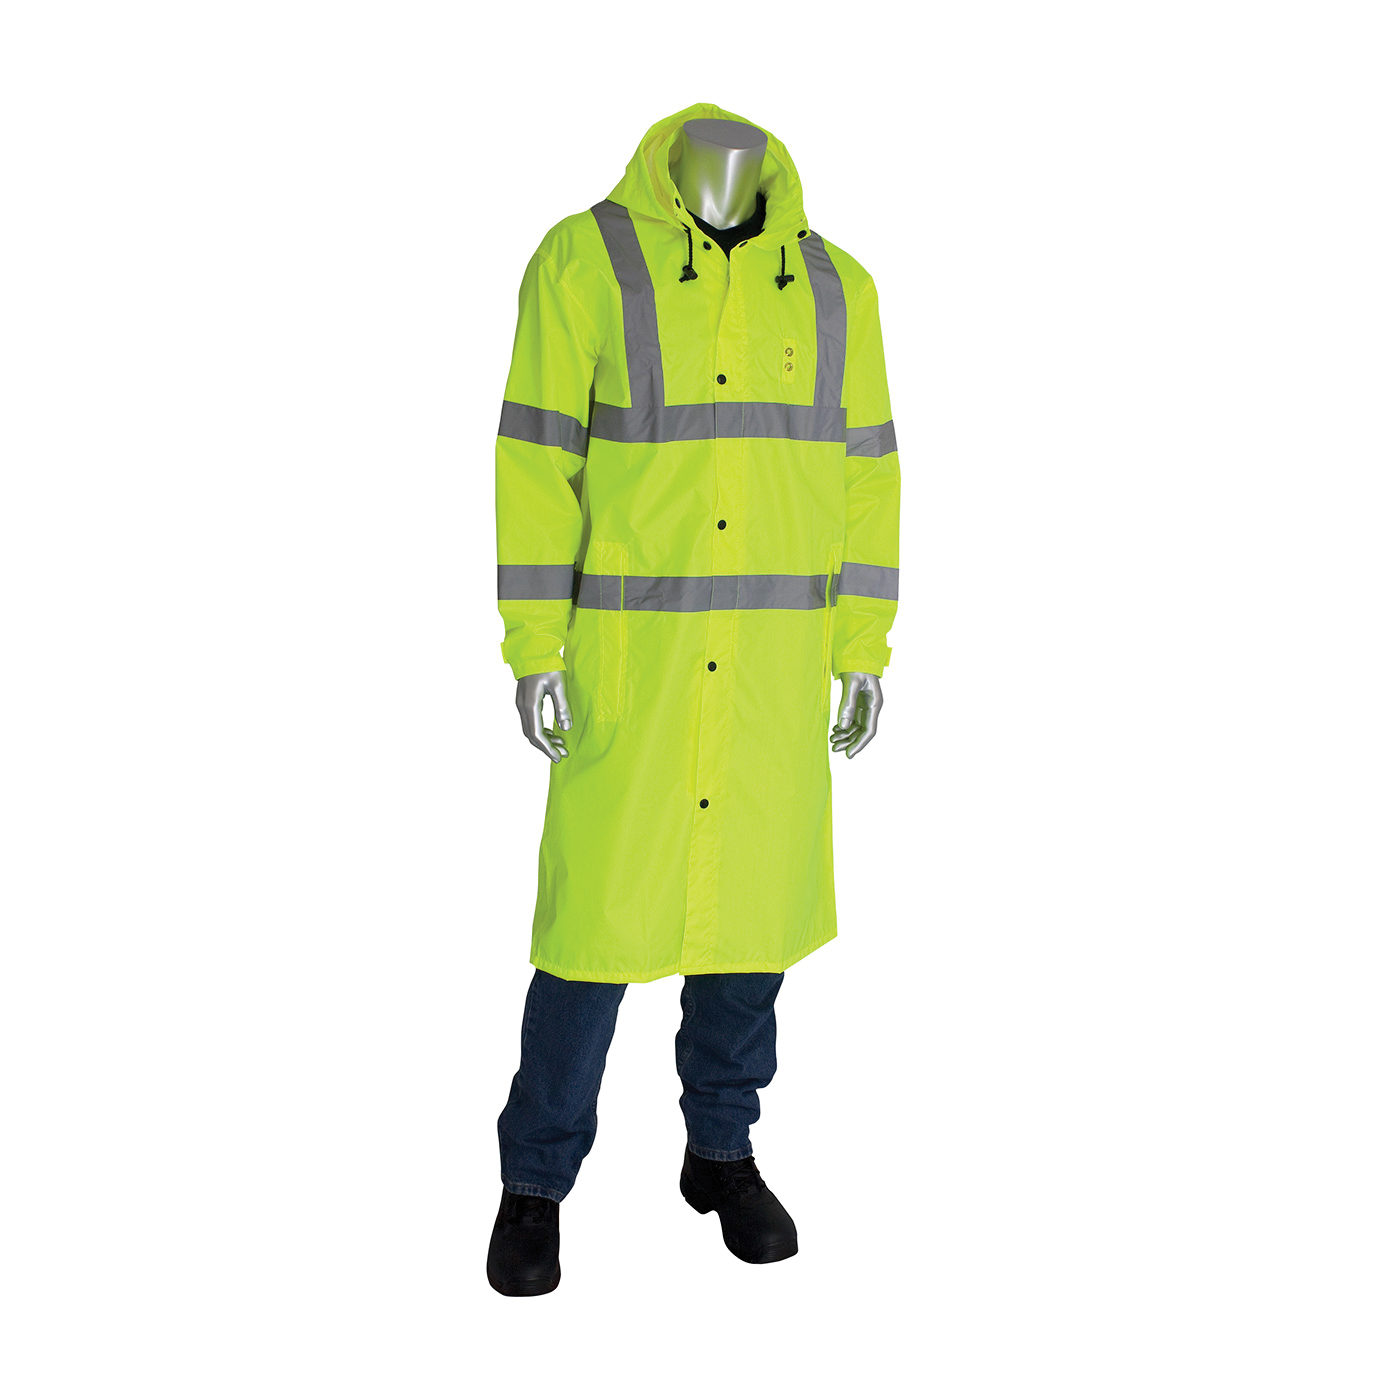 PIP® FALCON™ Viz™ 353-1048-LY/XL All Purpose Waterproof Rain Coat, XL, Hi-Viz Lime Yellow, 150D Polyester Coated with Polyurethane, Resists: Water, ANSI 107 Type R Class 3, Concealed Hood